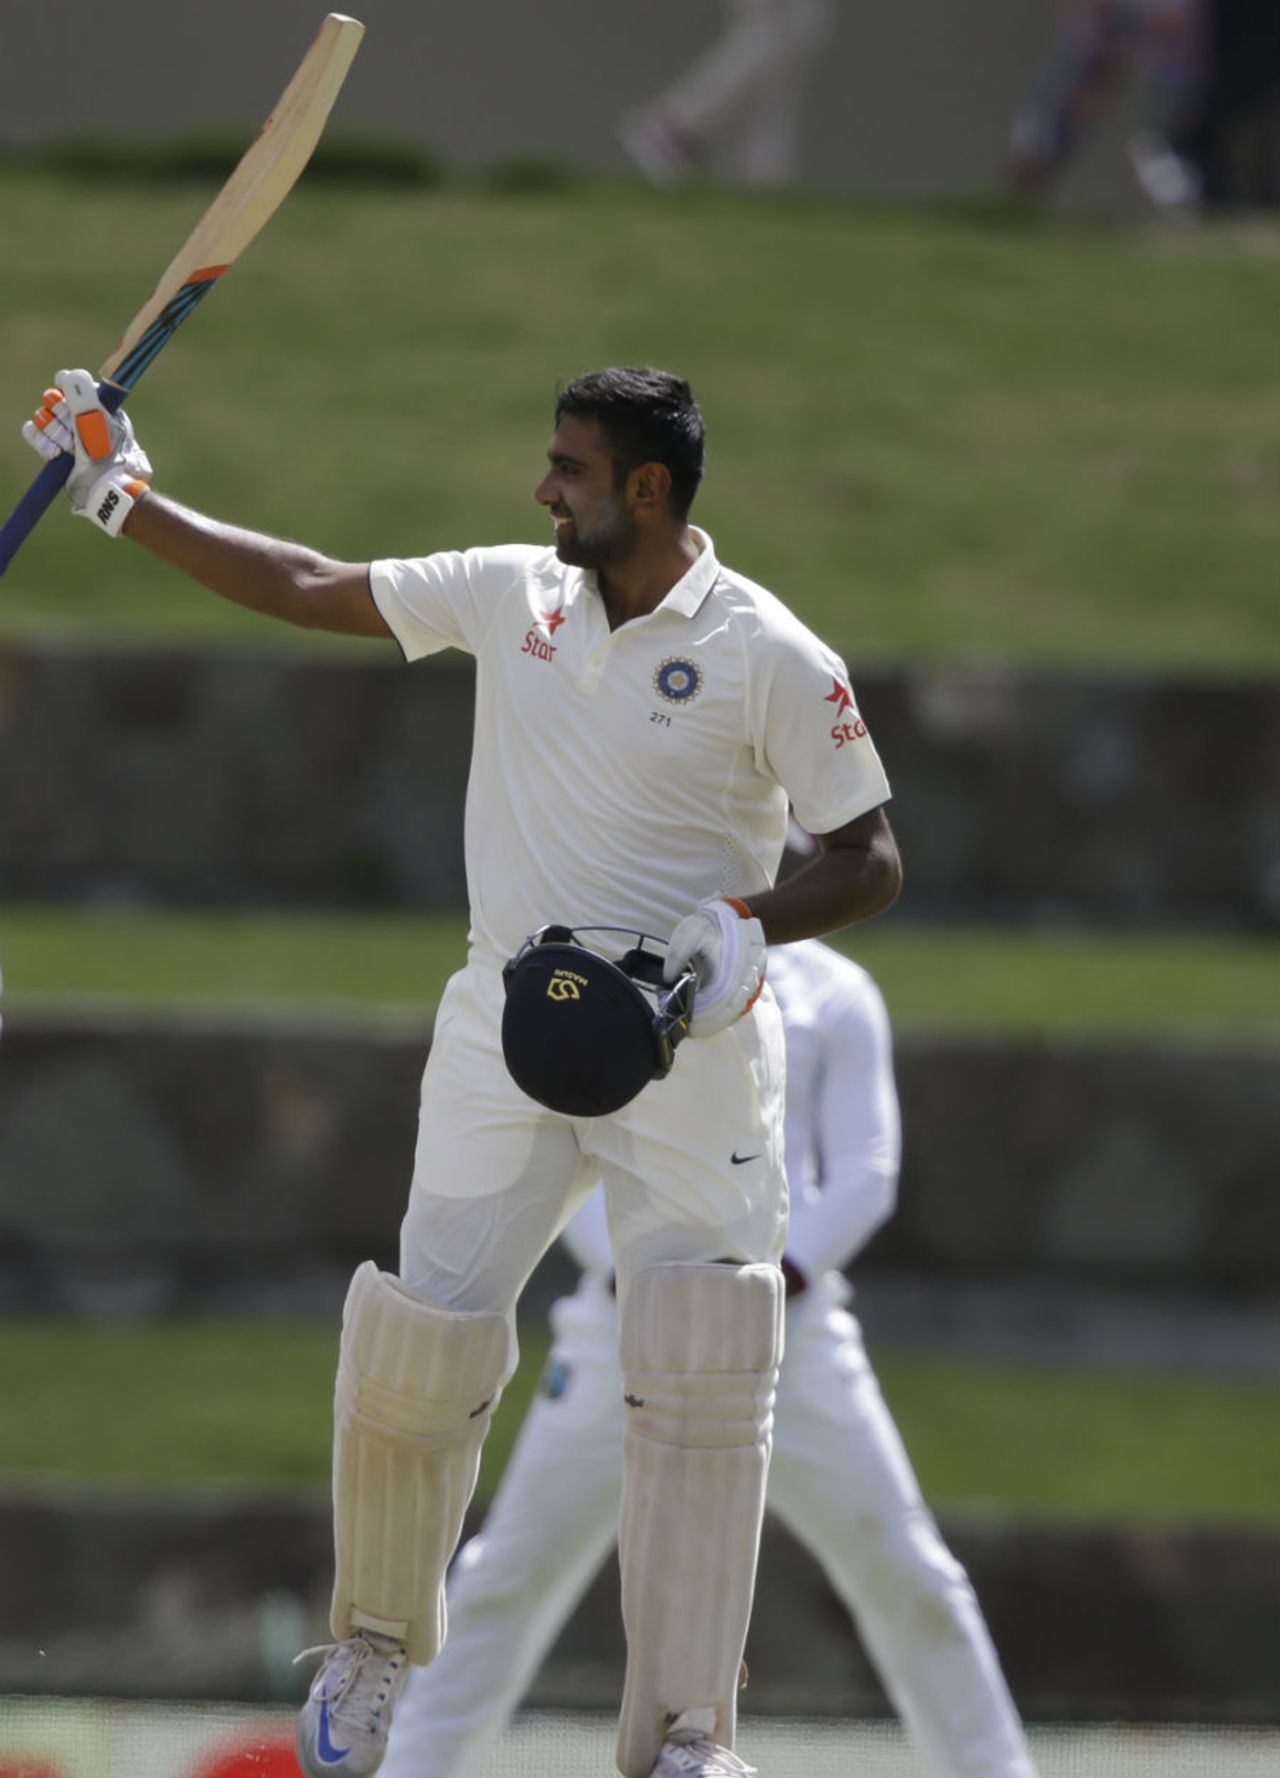 R Ashwin soaks in the applause after scoring his third Test century, West Indies v India, 1st Test, Antigua, 2nd day, July 22, 2016